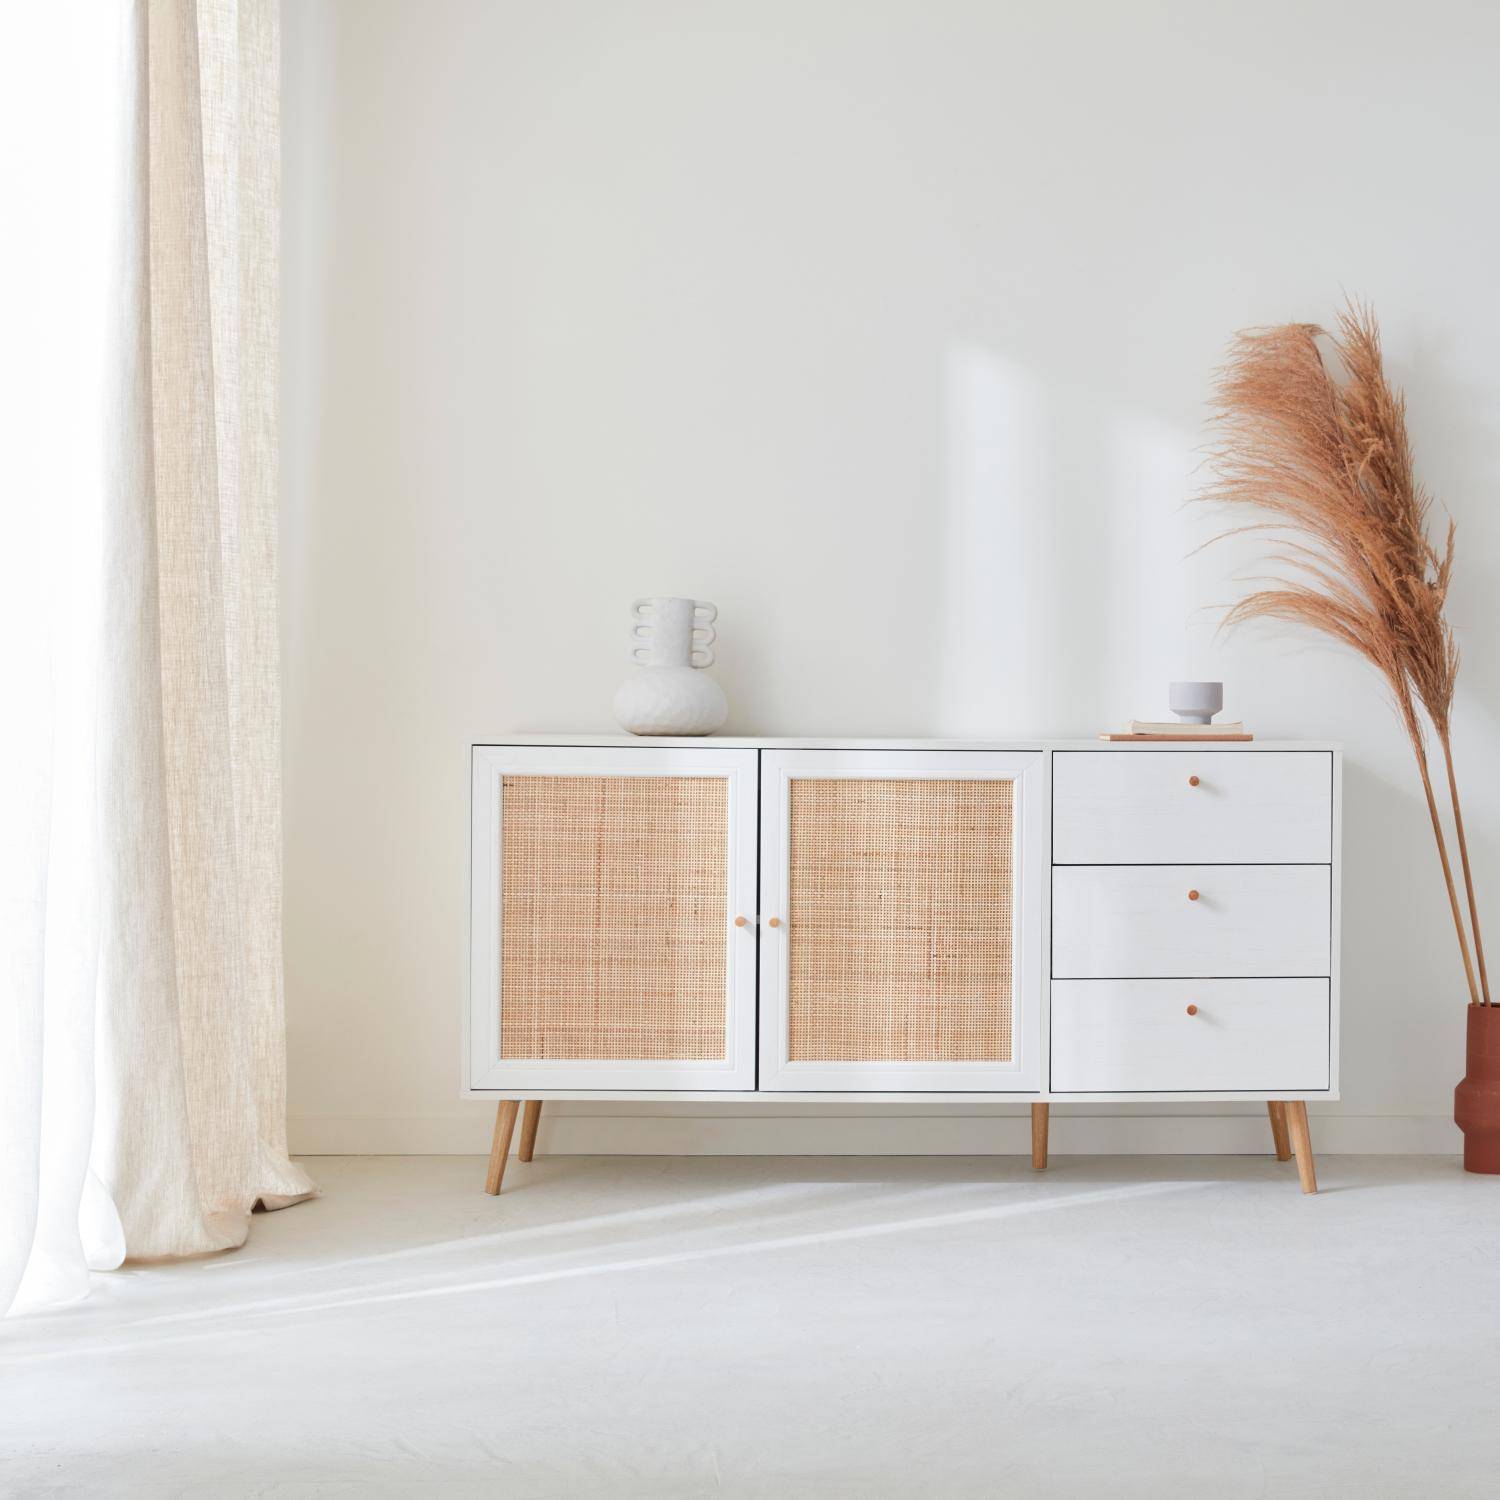 Wood and cane rattan detail sideboard, 2 doors & 3 drawers, White , L150xW39xH79cm  Photo1